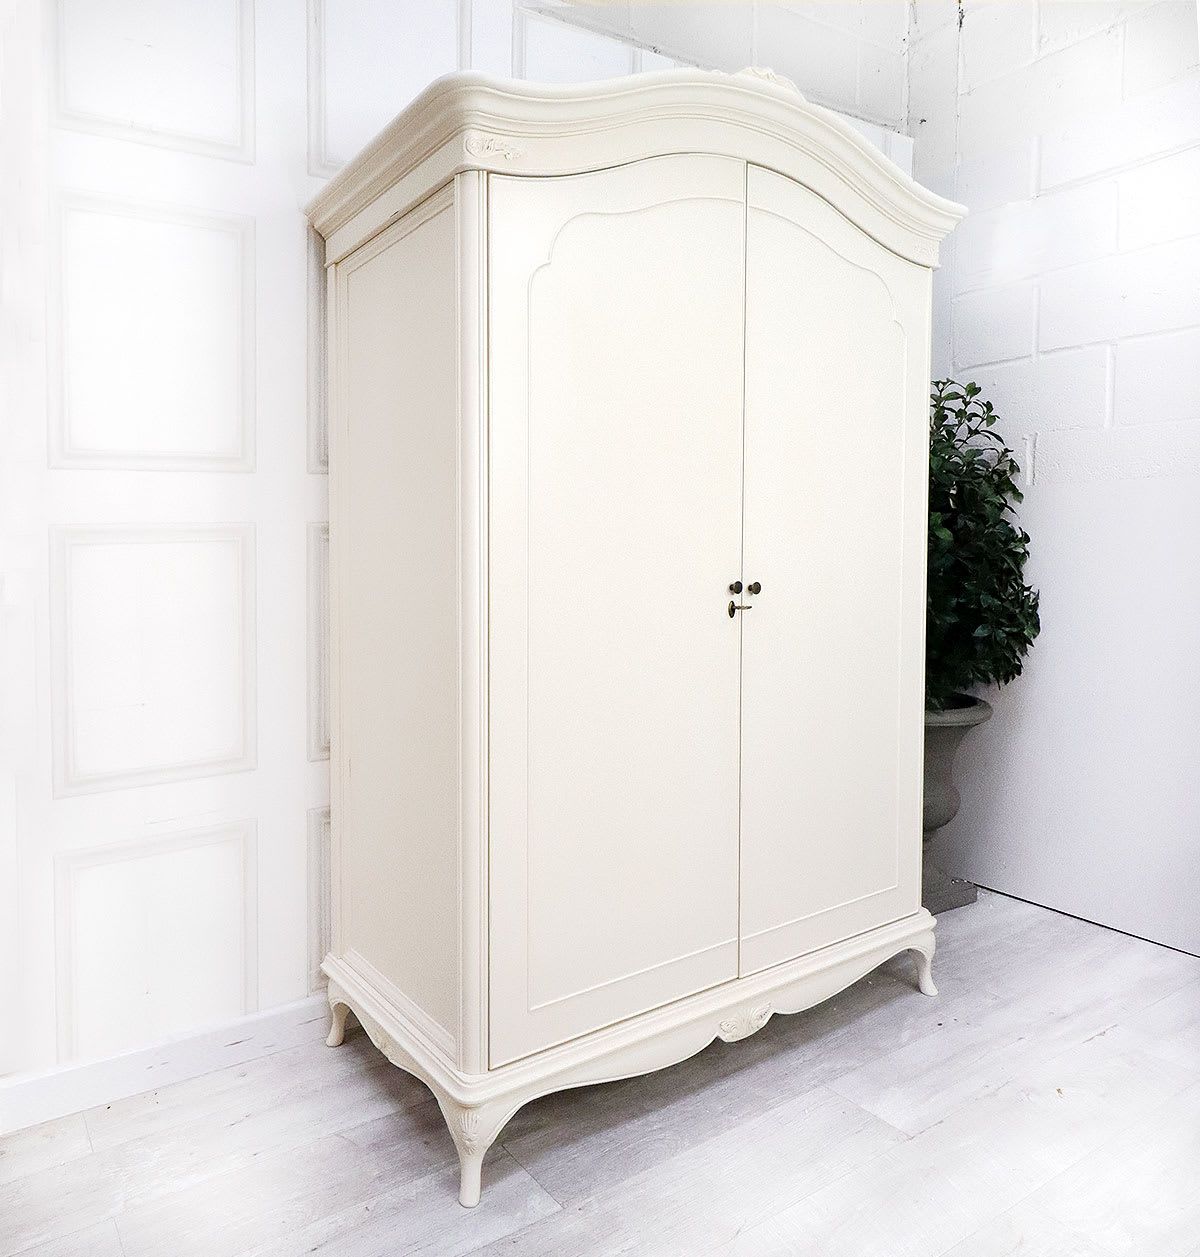 Willis & Gambier French Style Ivory Large Armoire Wardrobe | Nicky Cornell  A Uk Stockist Pertaining To Cream French Wardrobes (Gallery 1 of 20)